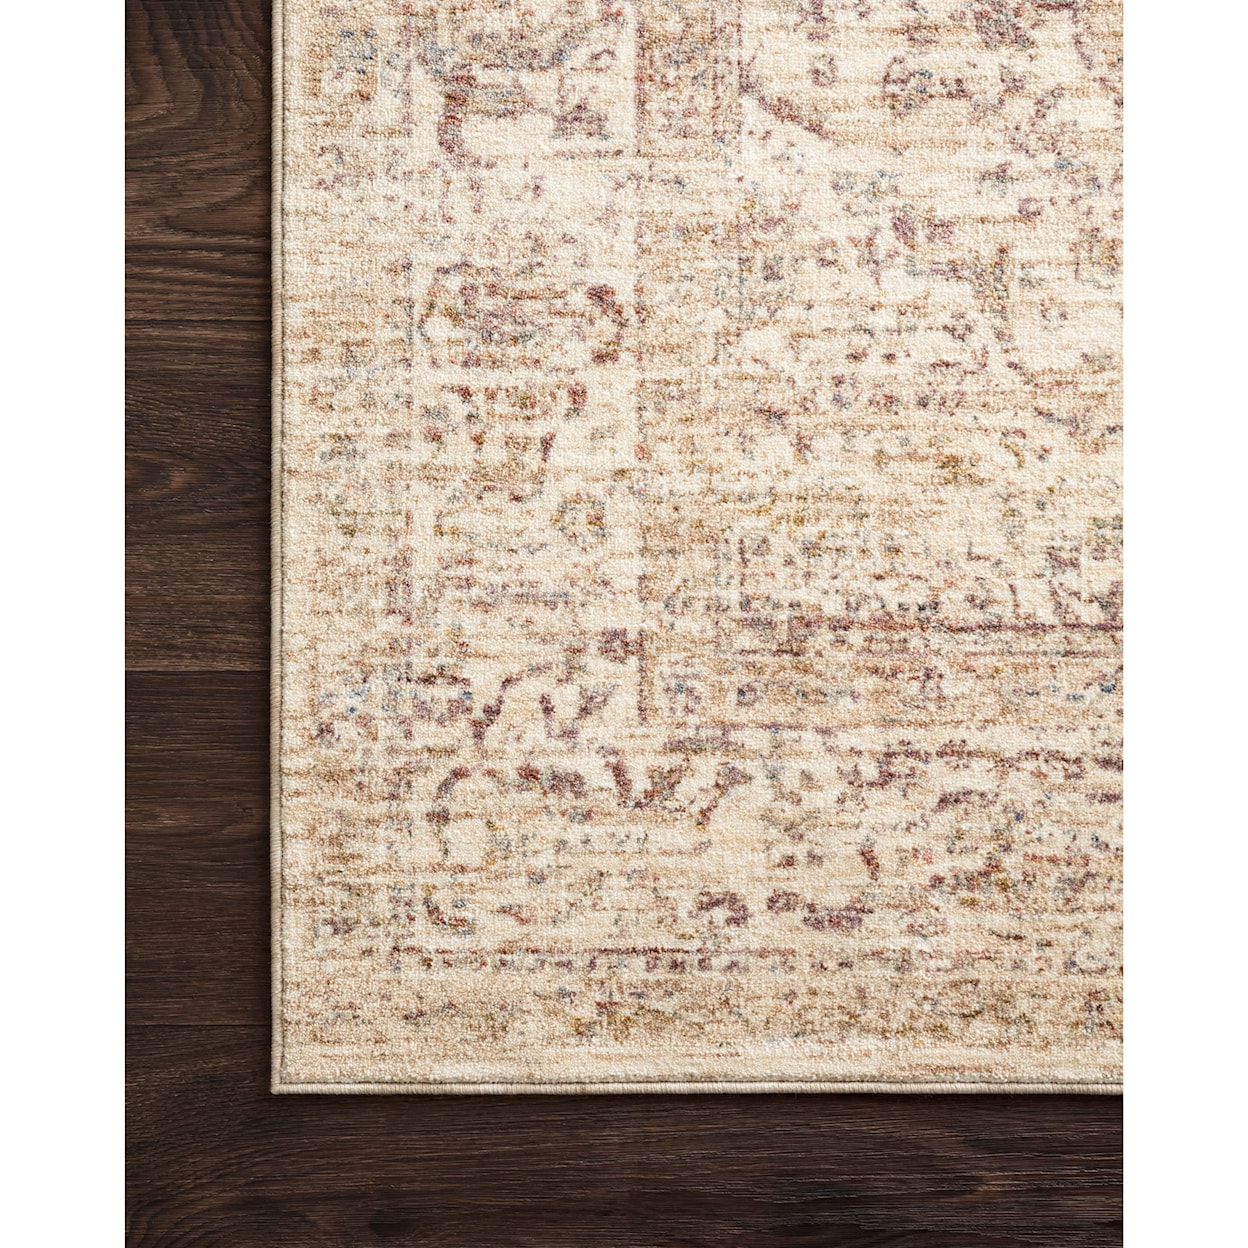 Loloi Rugs Revere 11'6" x 15'6" Ivory / Berry Rug